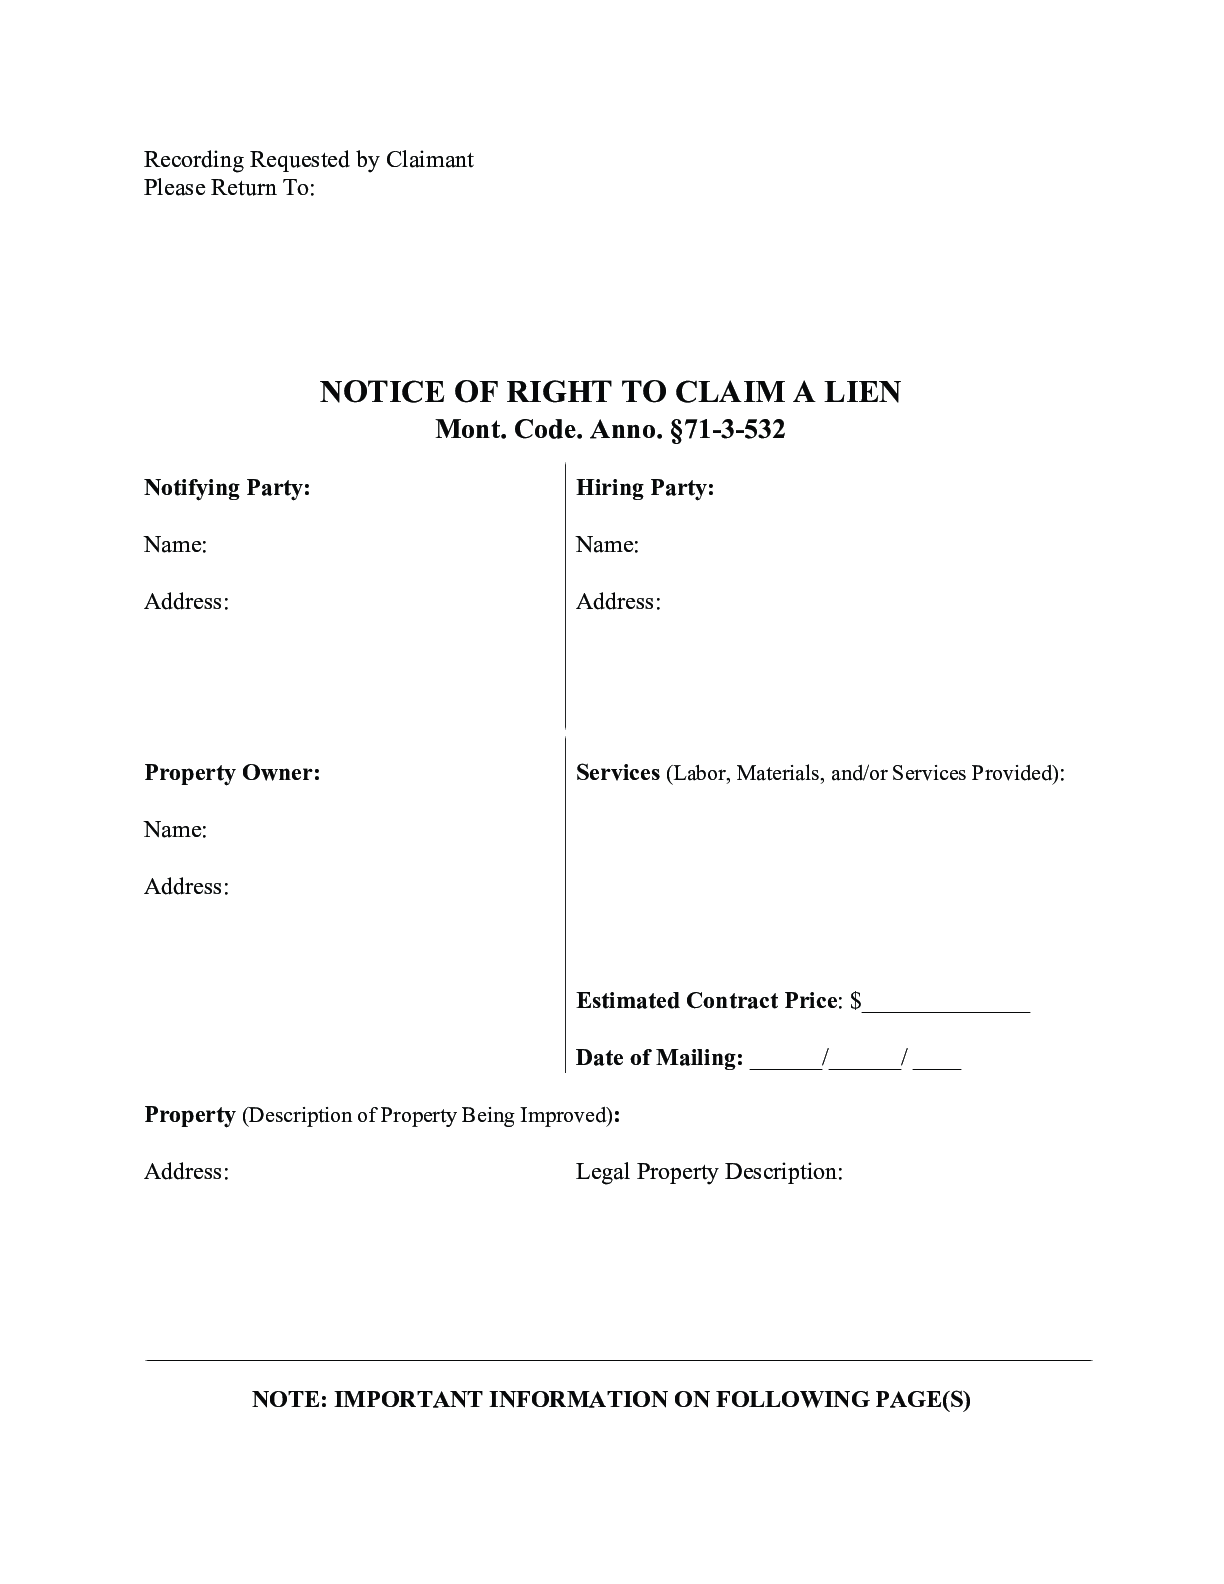 Montana Notice of Right to Claim Lien – Form Download - free from